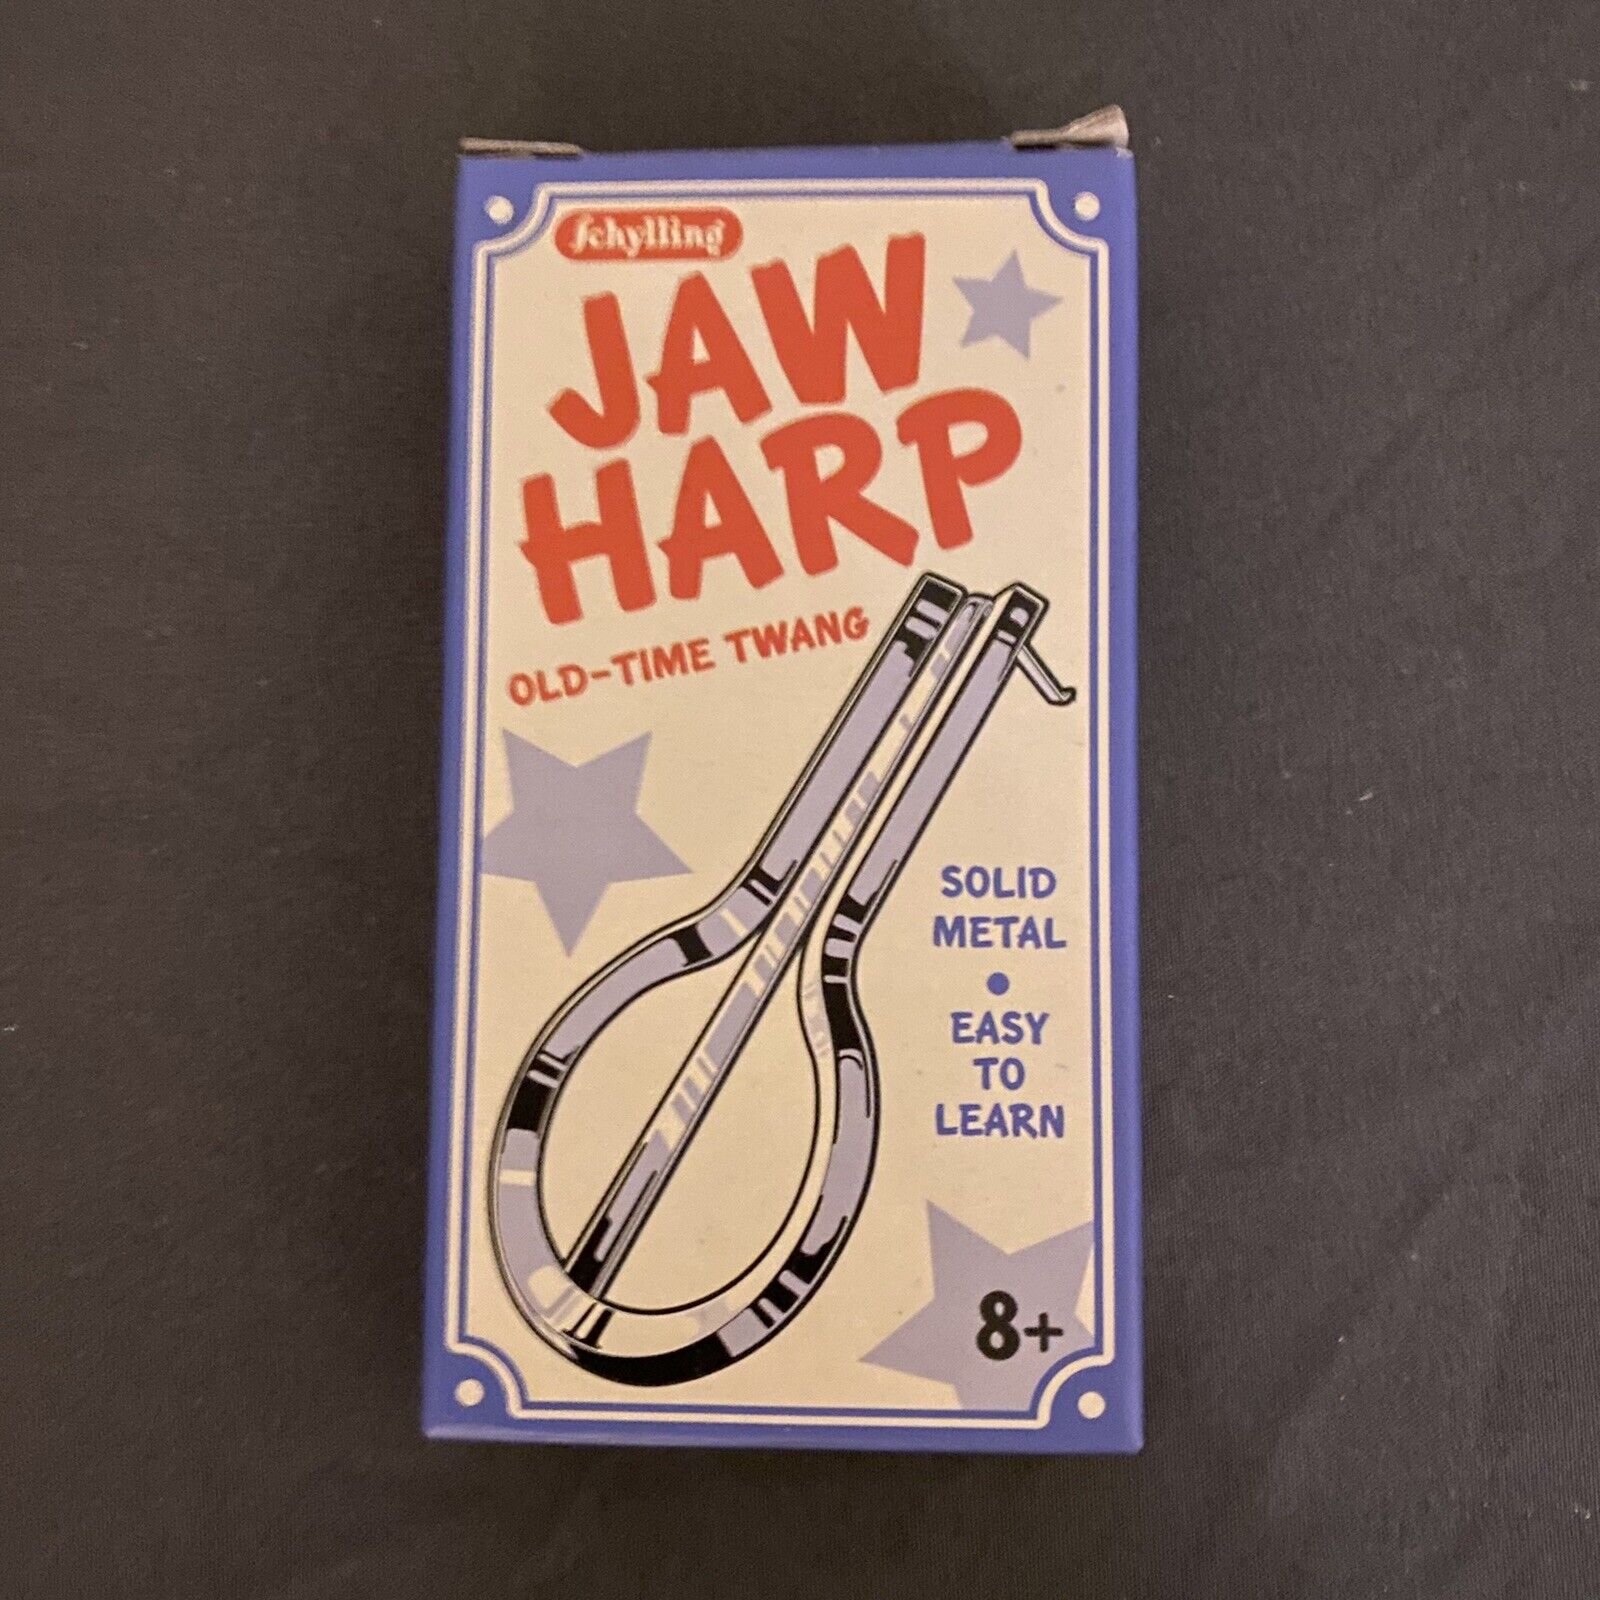 Jaw Harp Old-time Twang Schylling Solid Metal Old-fashioned Mysical Instrument